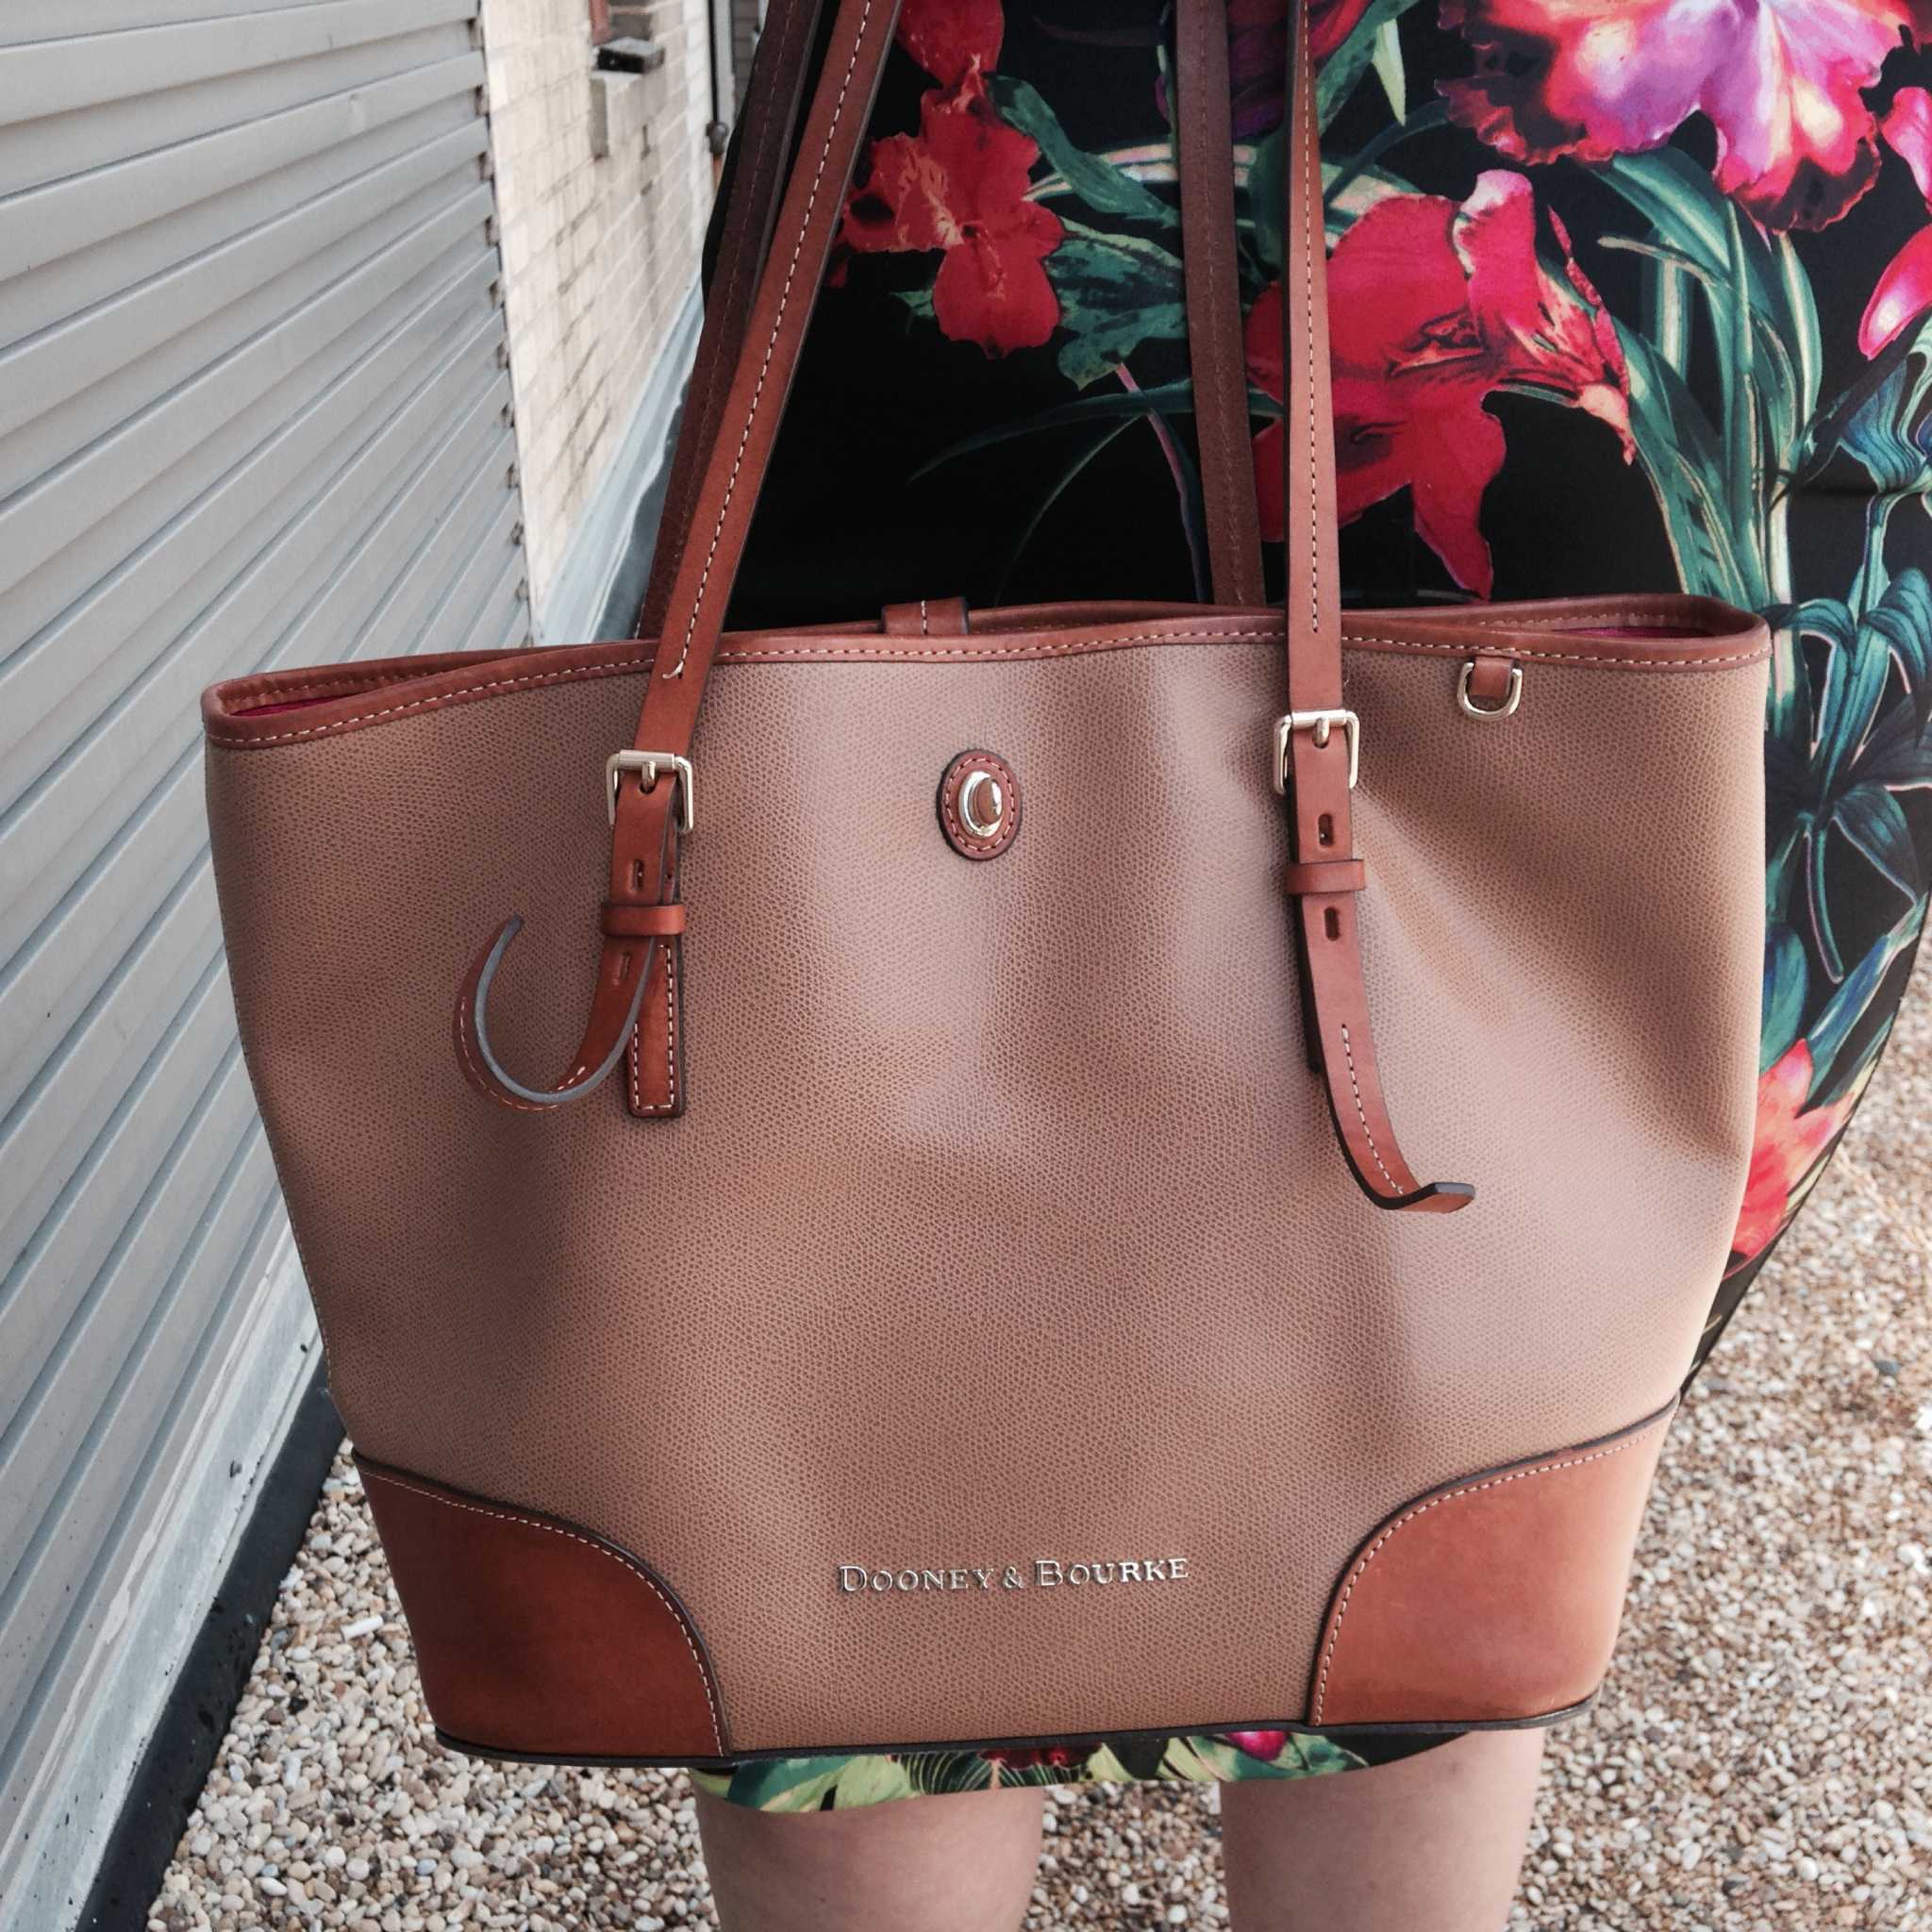 New Dooney Bourke Purse at Goodwill SA Accents Boutique